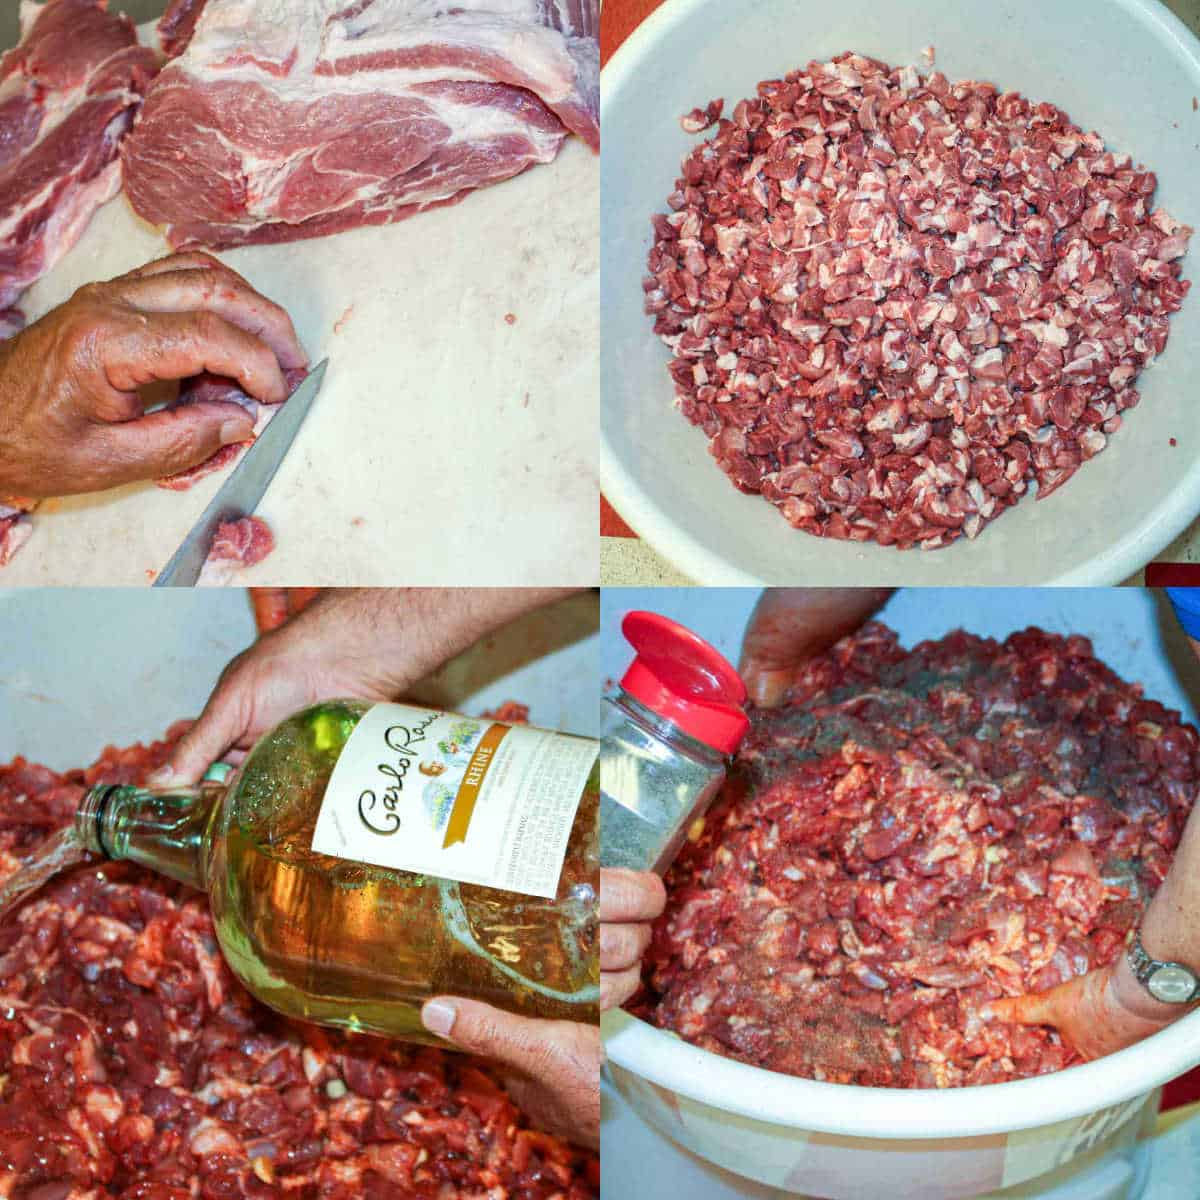 A series of photos showing the process of preparing meat for Portuguese sausage